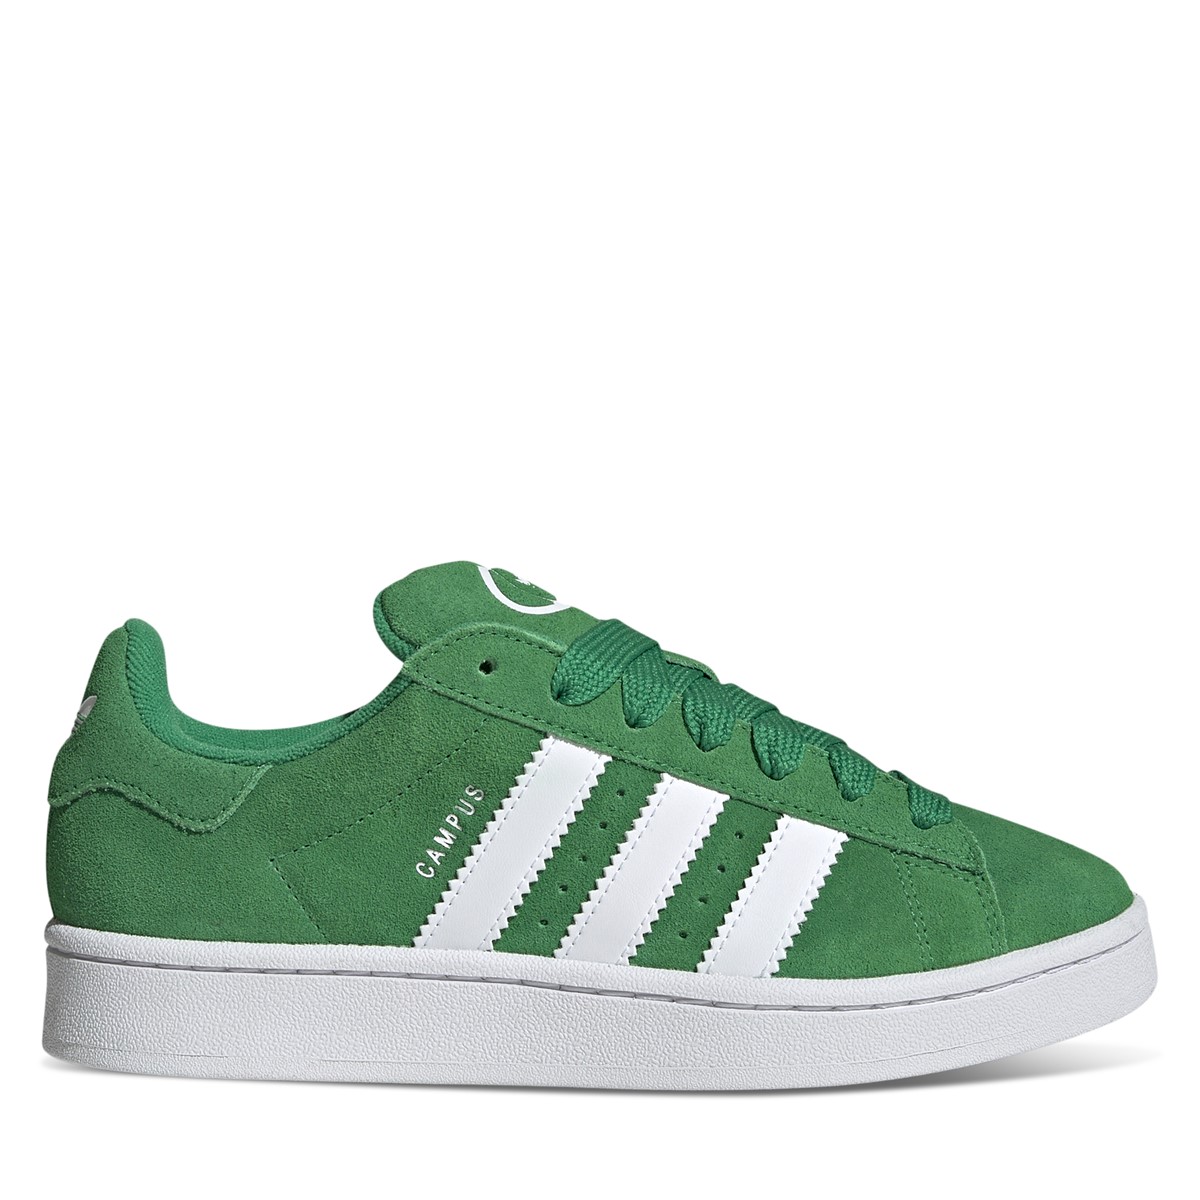 Womens Campus 00s Sneakers in Green/White